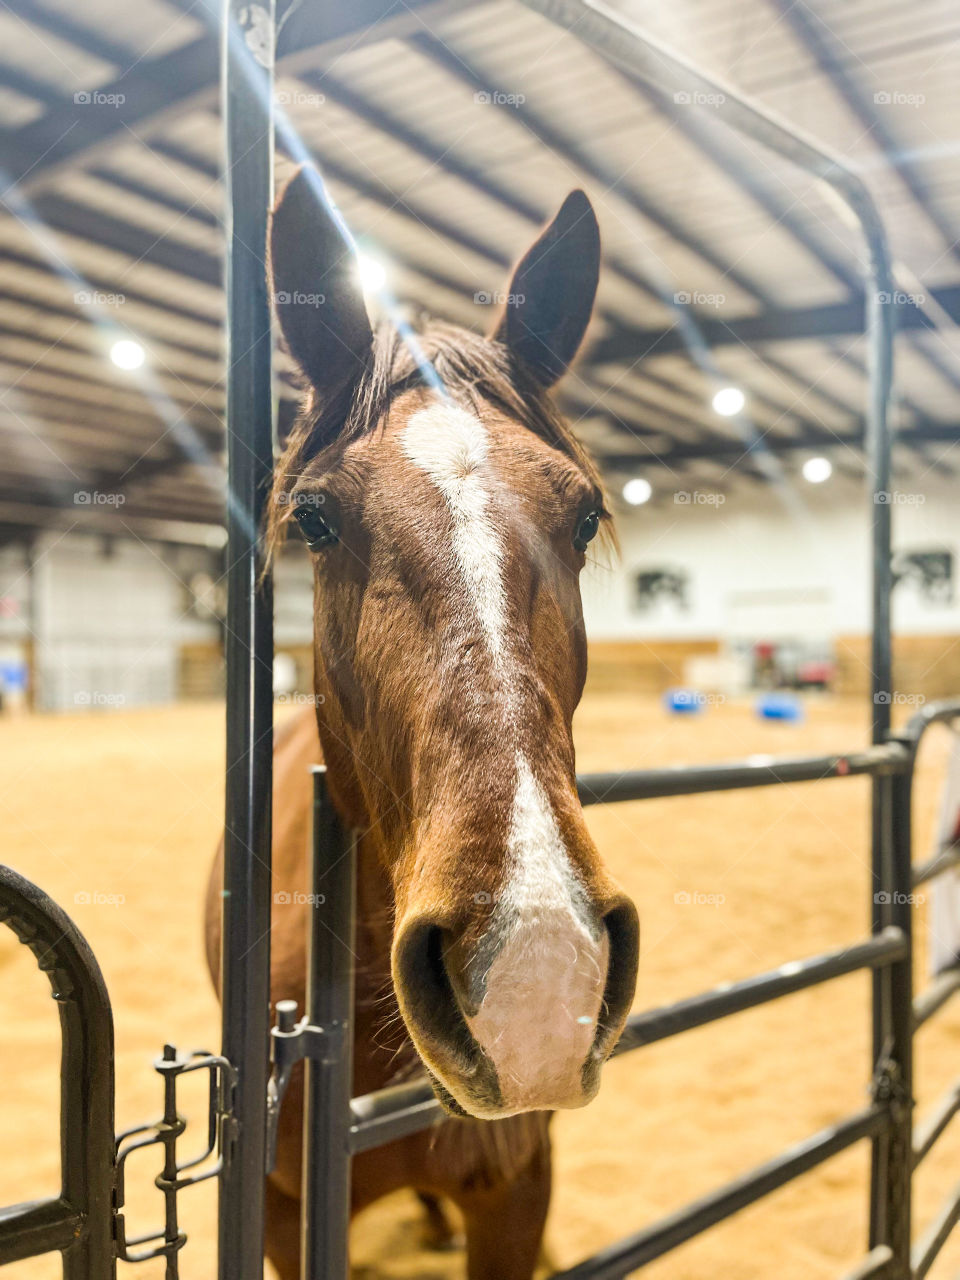 A horse peers over an enclosure at the Forget-Me-Knot Horse Sanctuary in Linn Creek, MO.